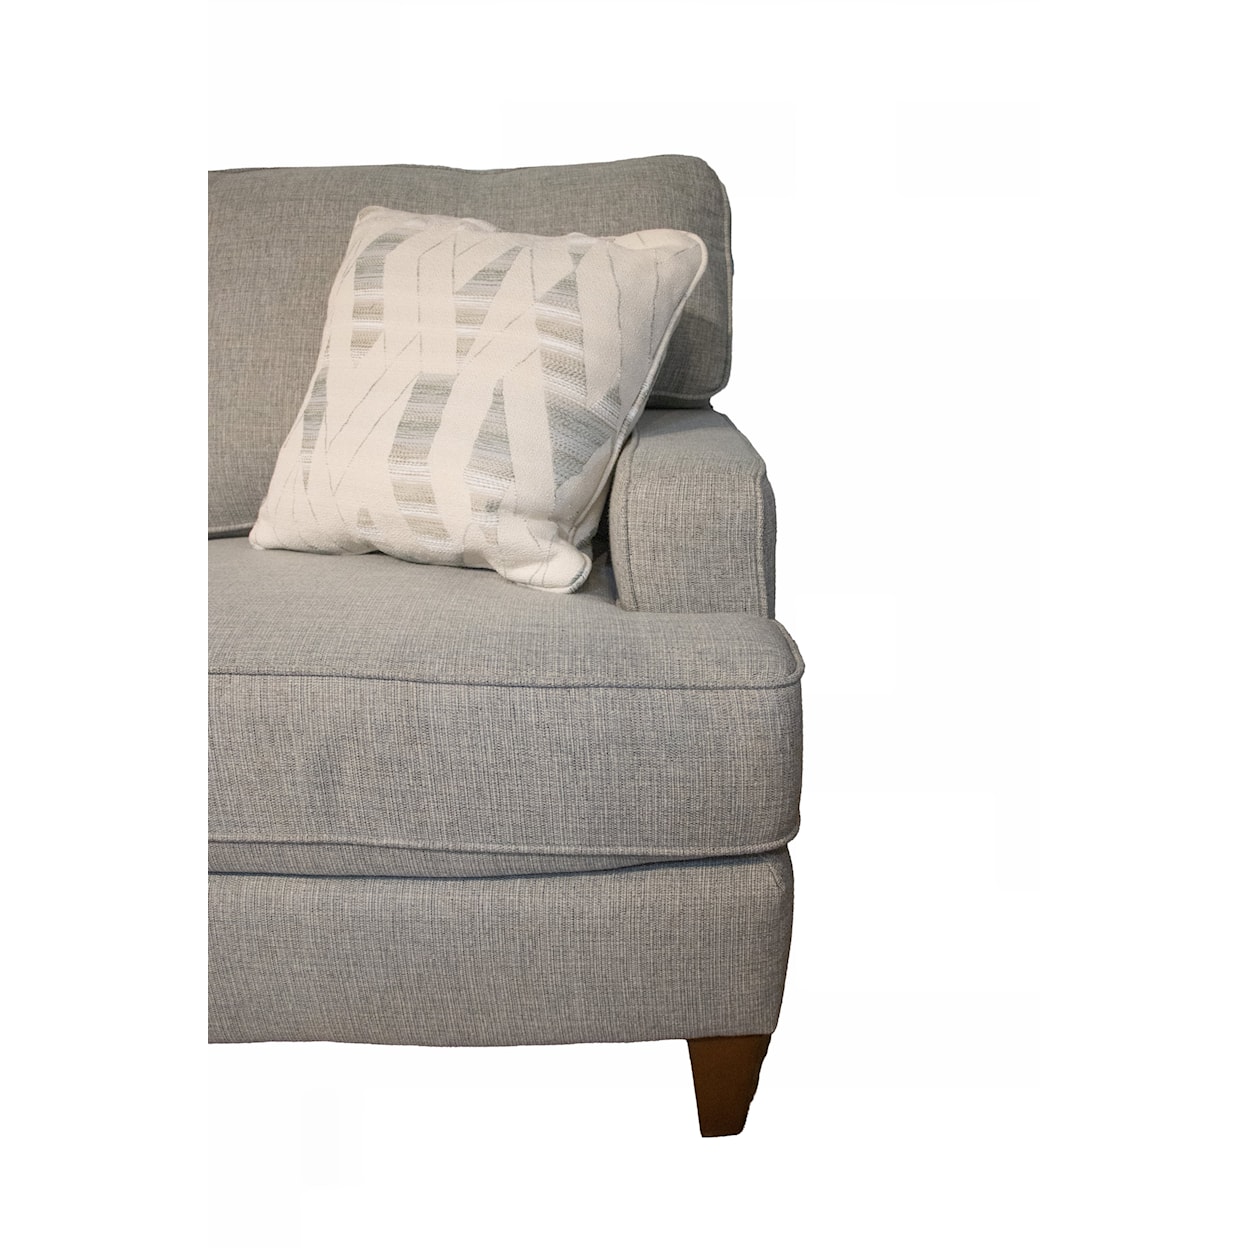 England Lewis 3 Cushion Sofa with Track Arms